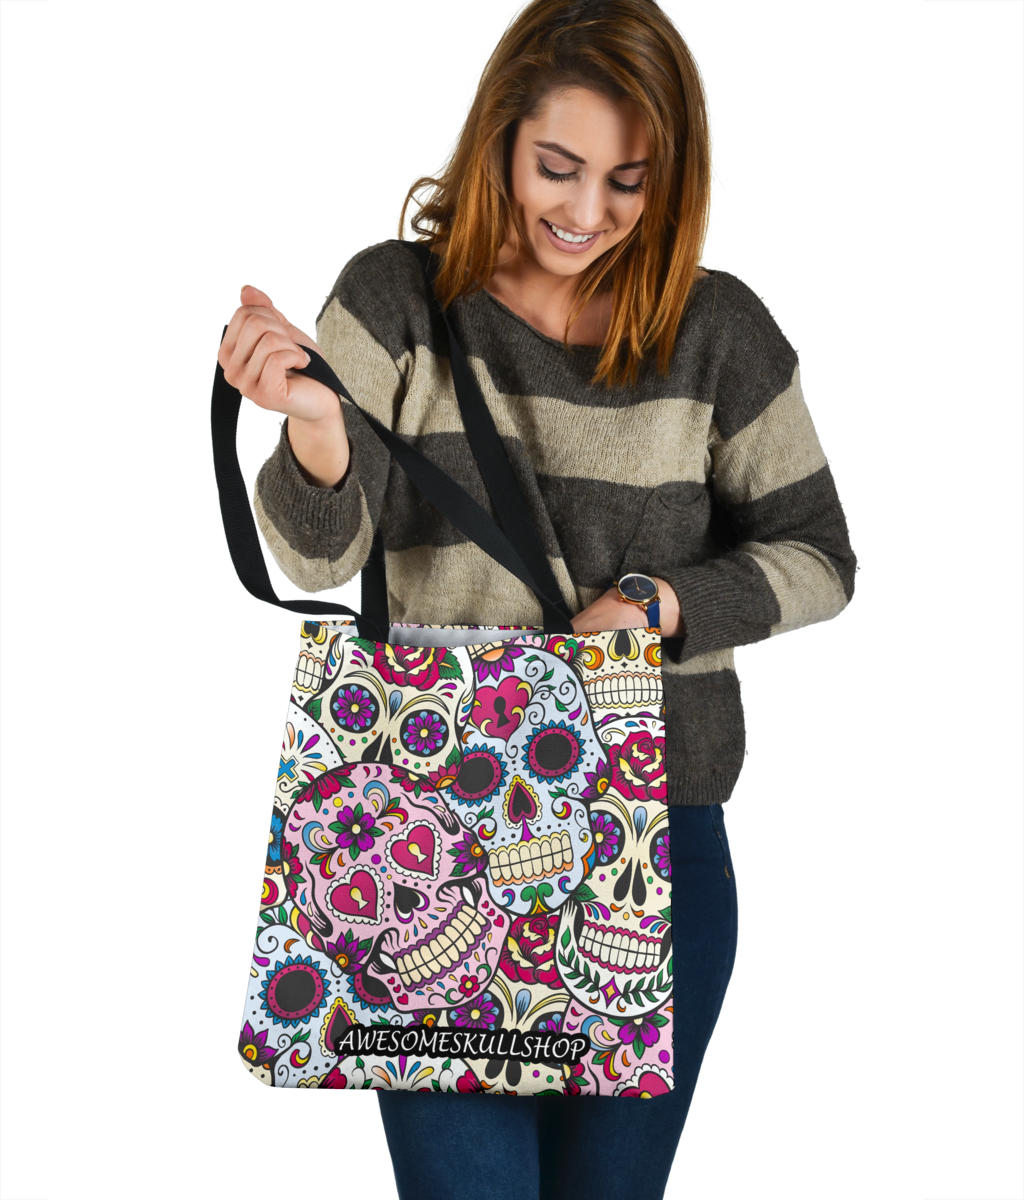 Awesome skull tote bag